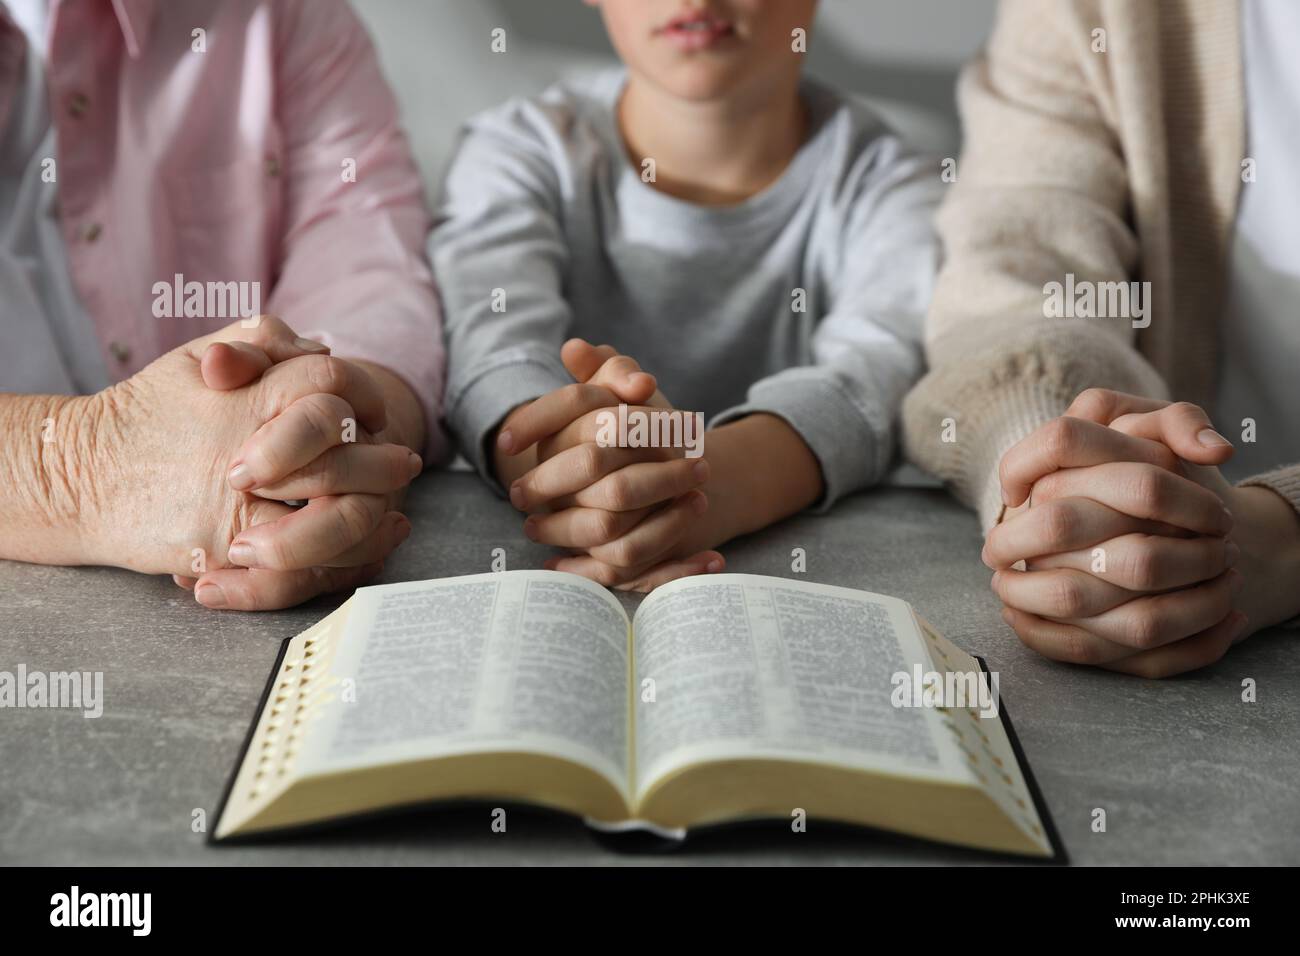 Boy and his godparents praying together at grey table, closeup Stock Photo